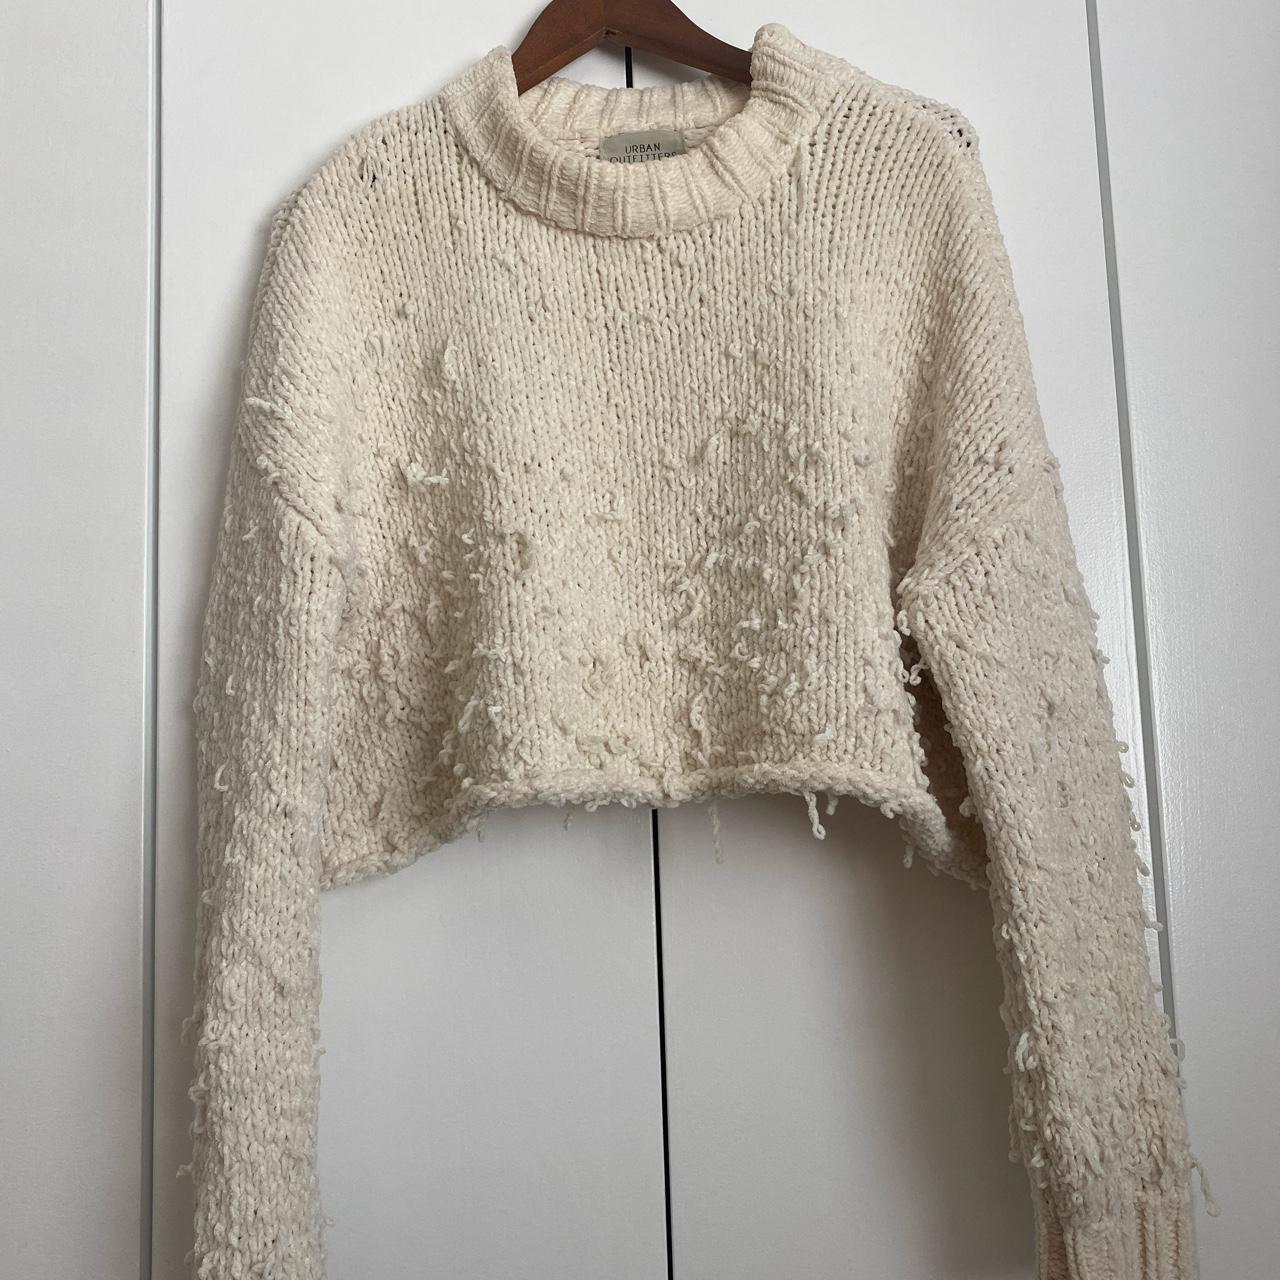 distressed sweater. urban outfitters, size S but can...